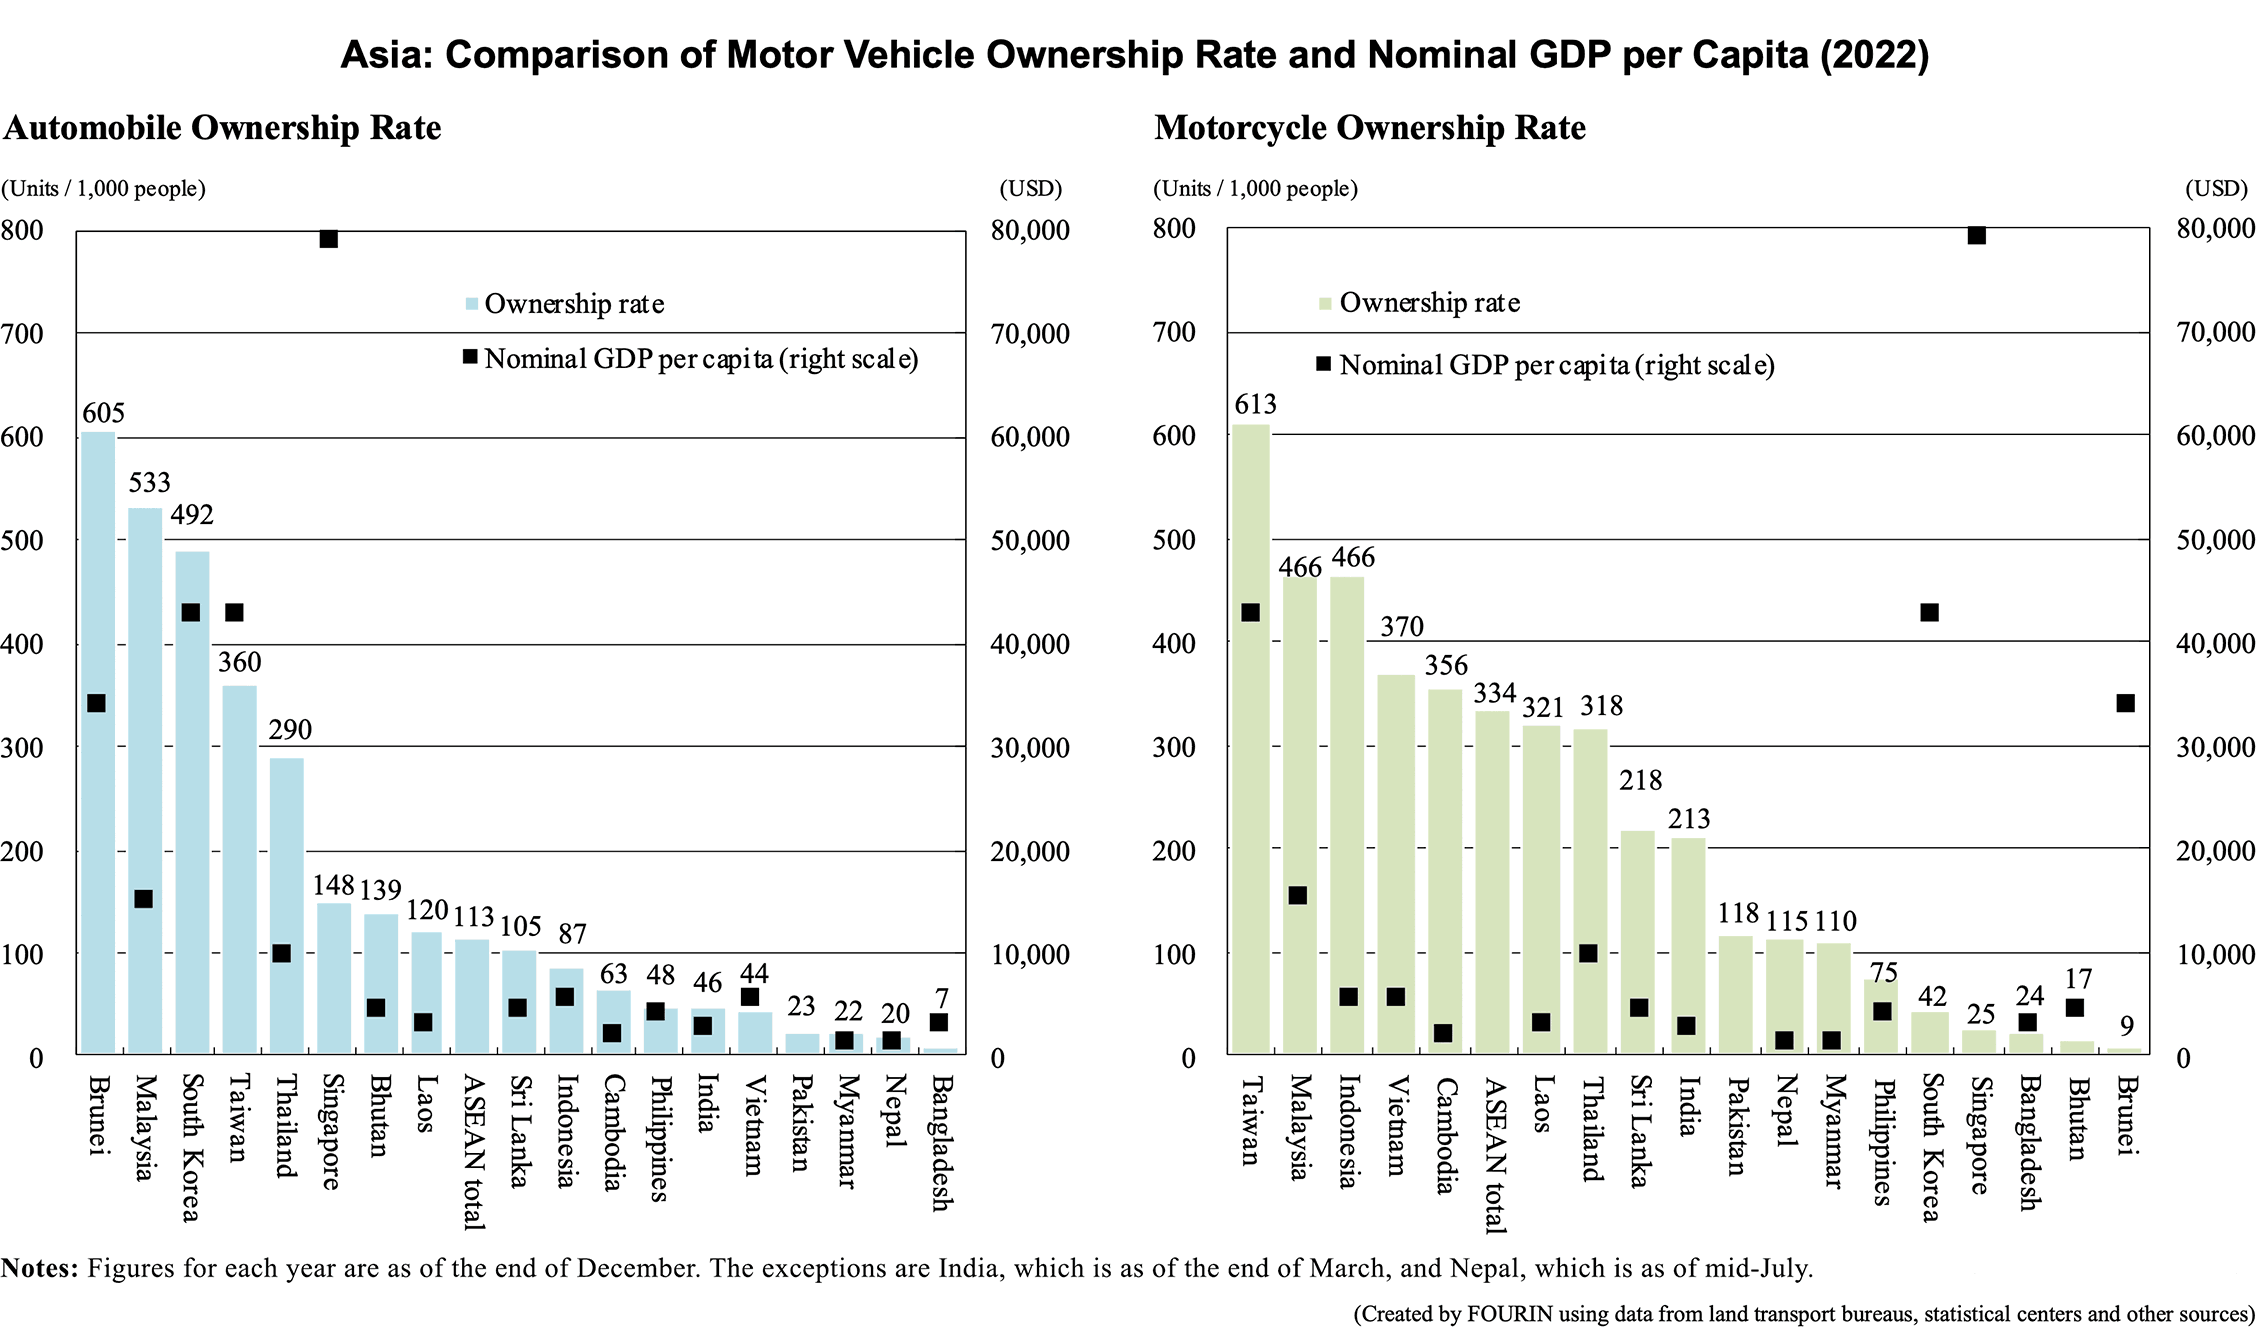 Bar graphs: Asia: Comparison of Motor Vehicle Ownership Rate and Nominal GDP per Capita (2022)